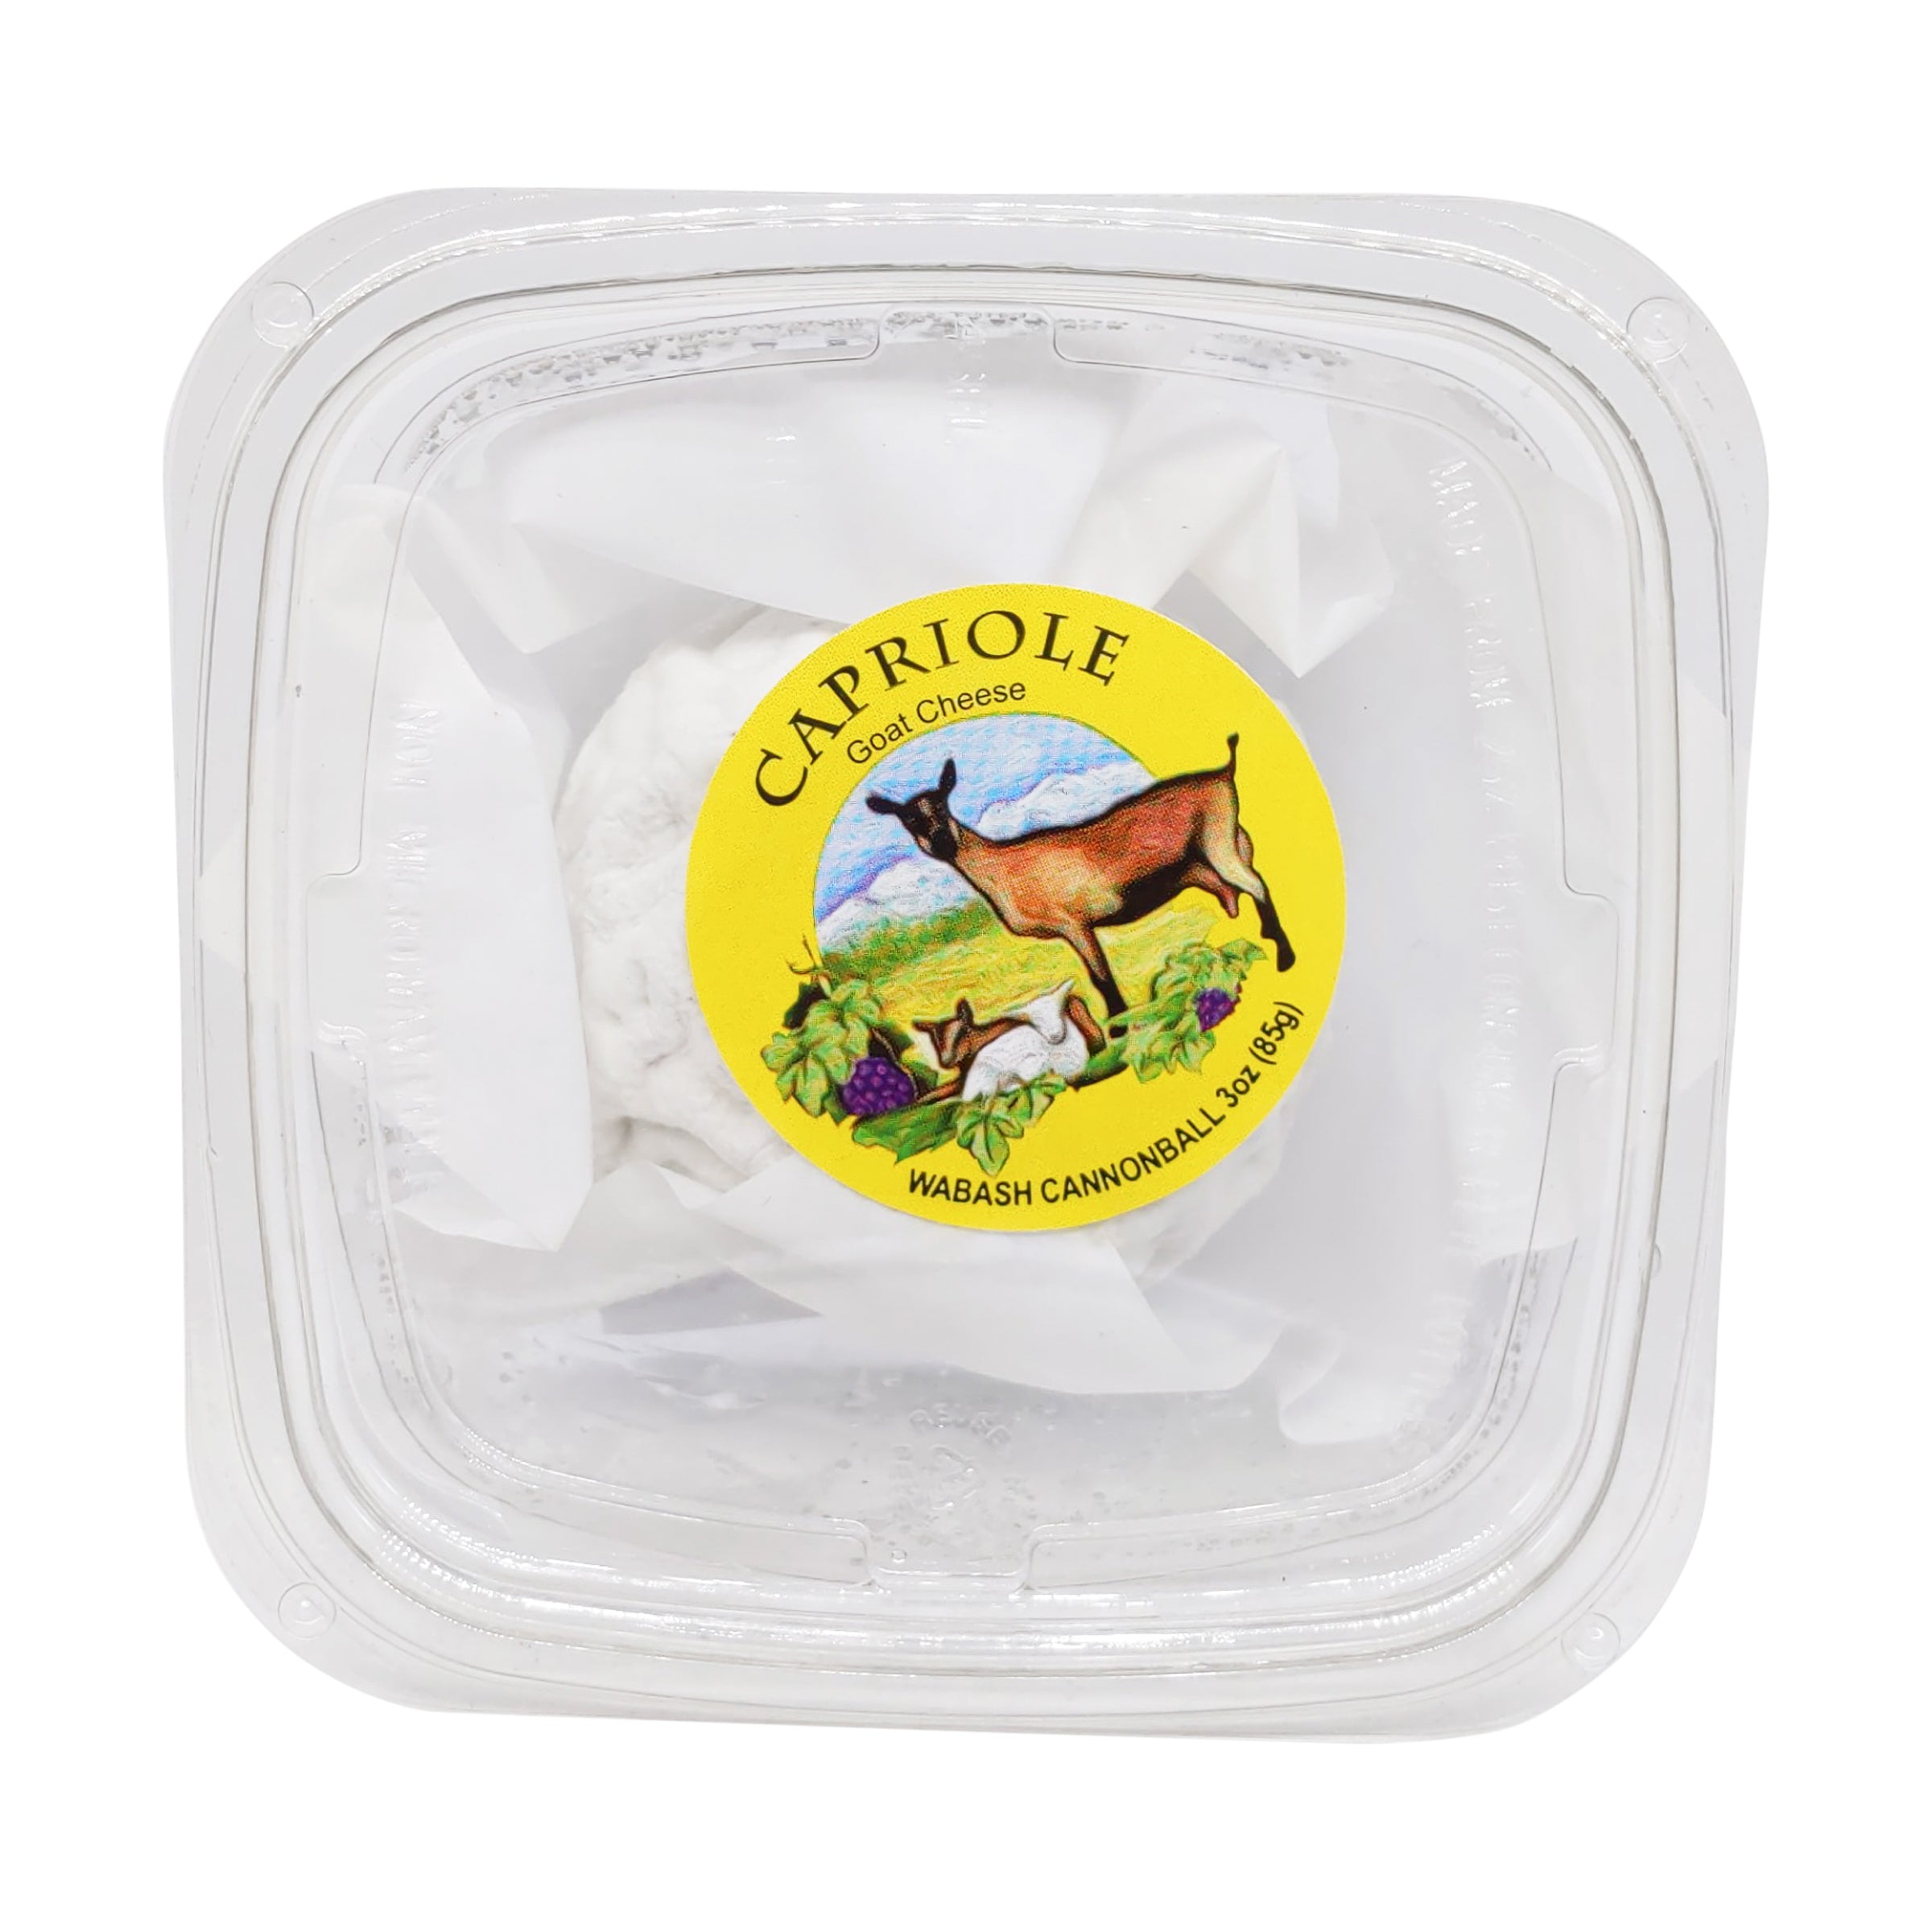 Capriole Wabash Cannonball Cheese 3 oz